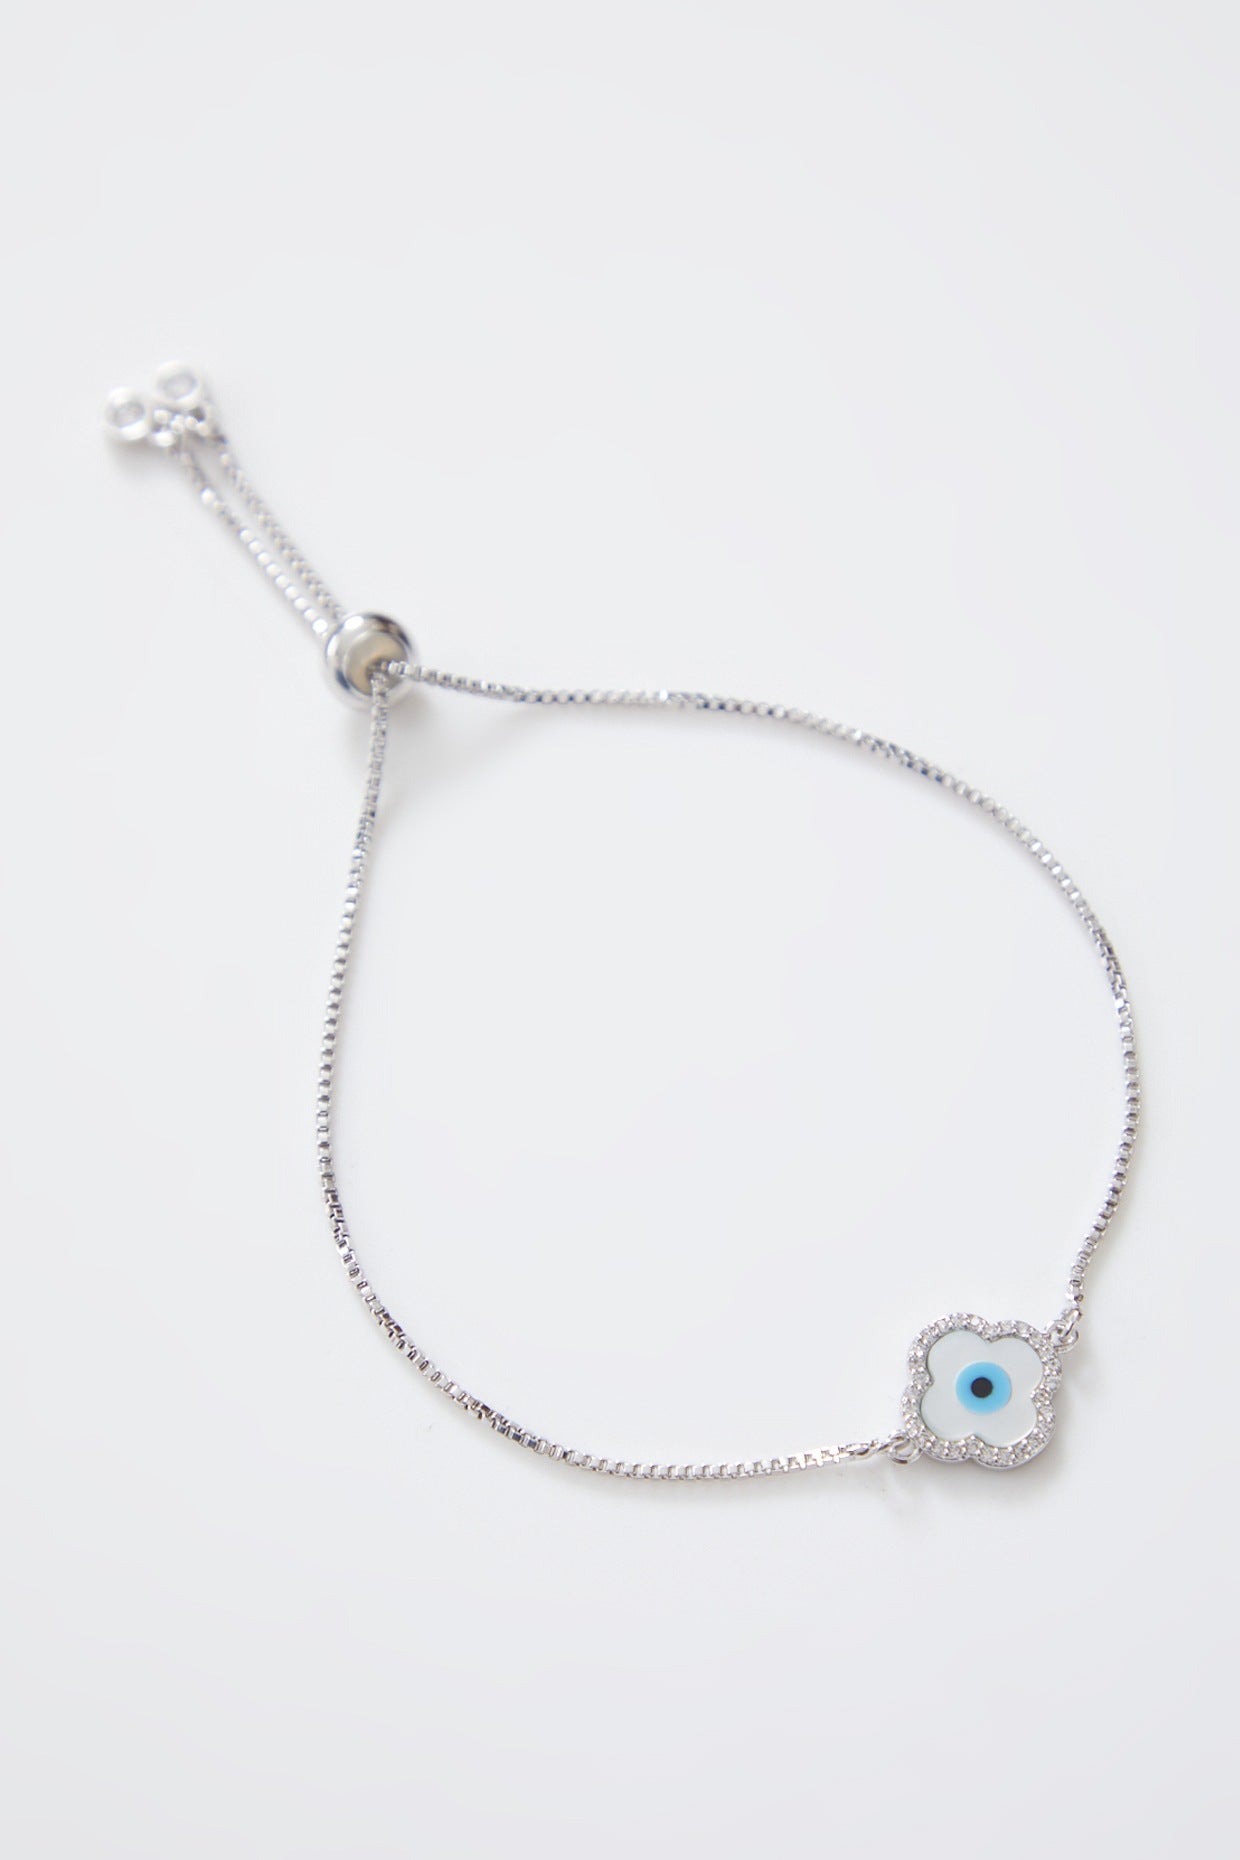 Delicate Mother of Pearl Silver Evil Eye Rakhi With Silver Adjustable String